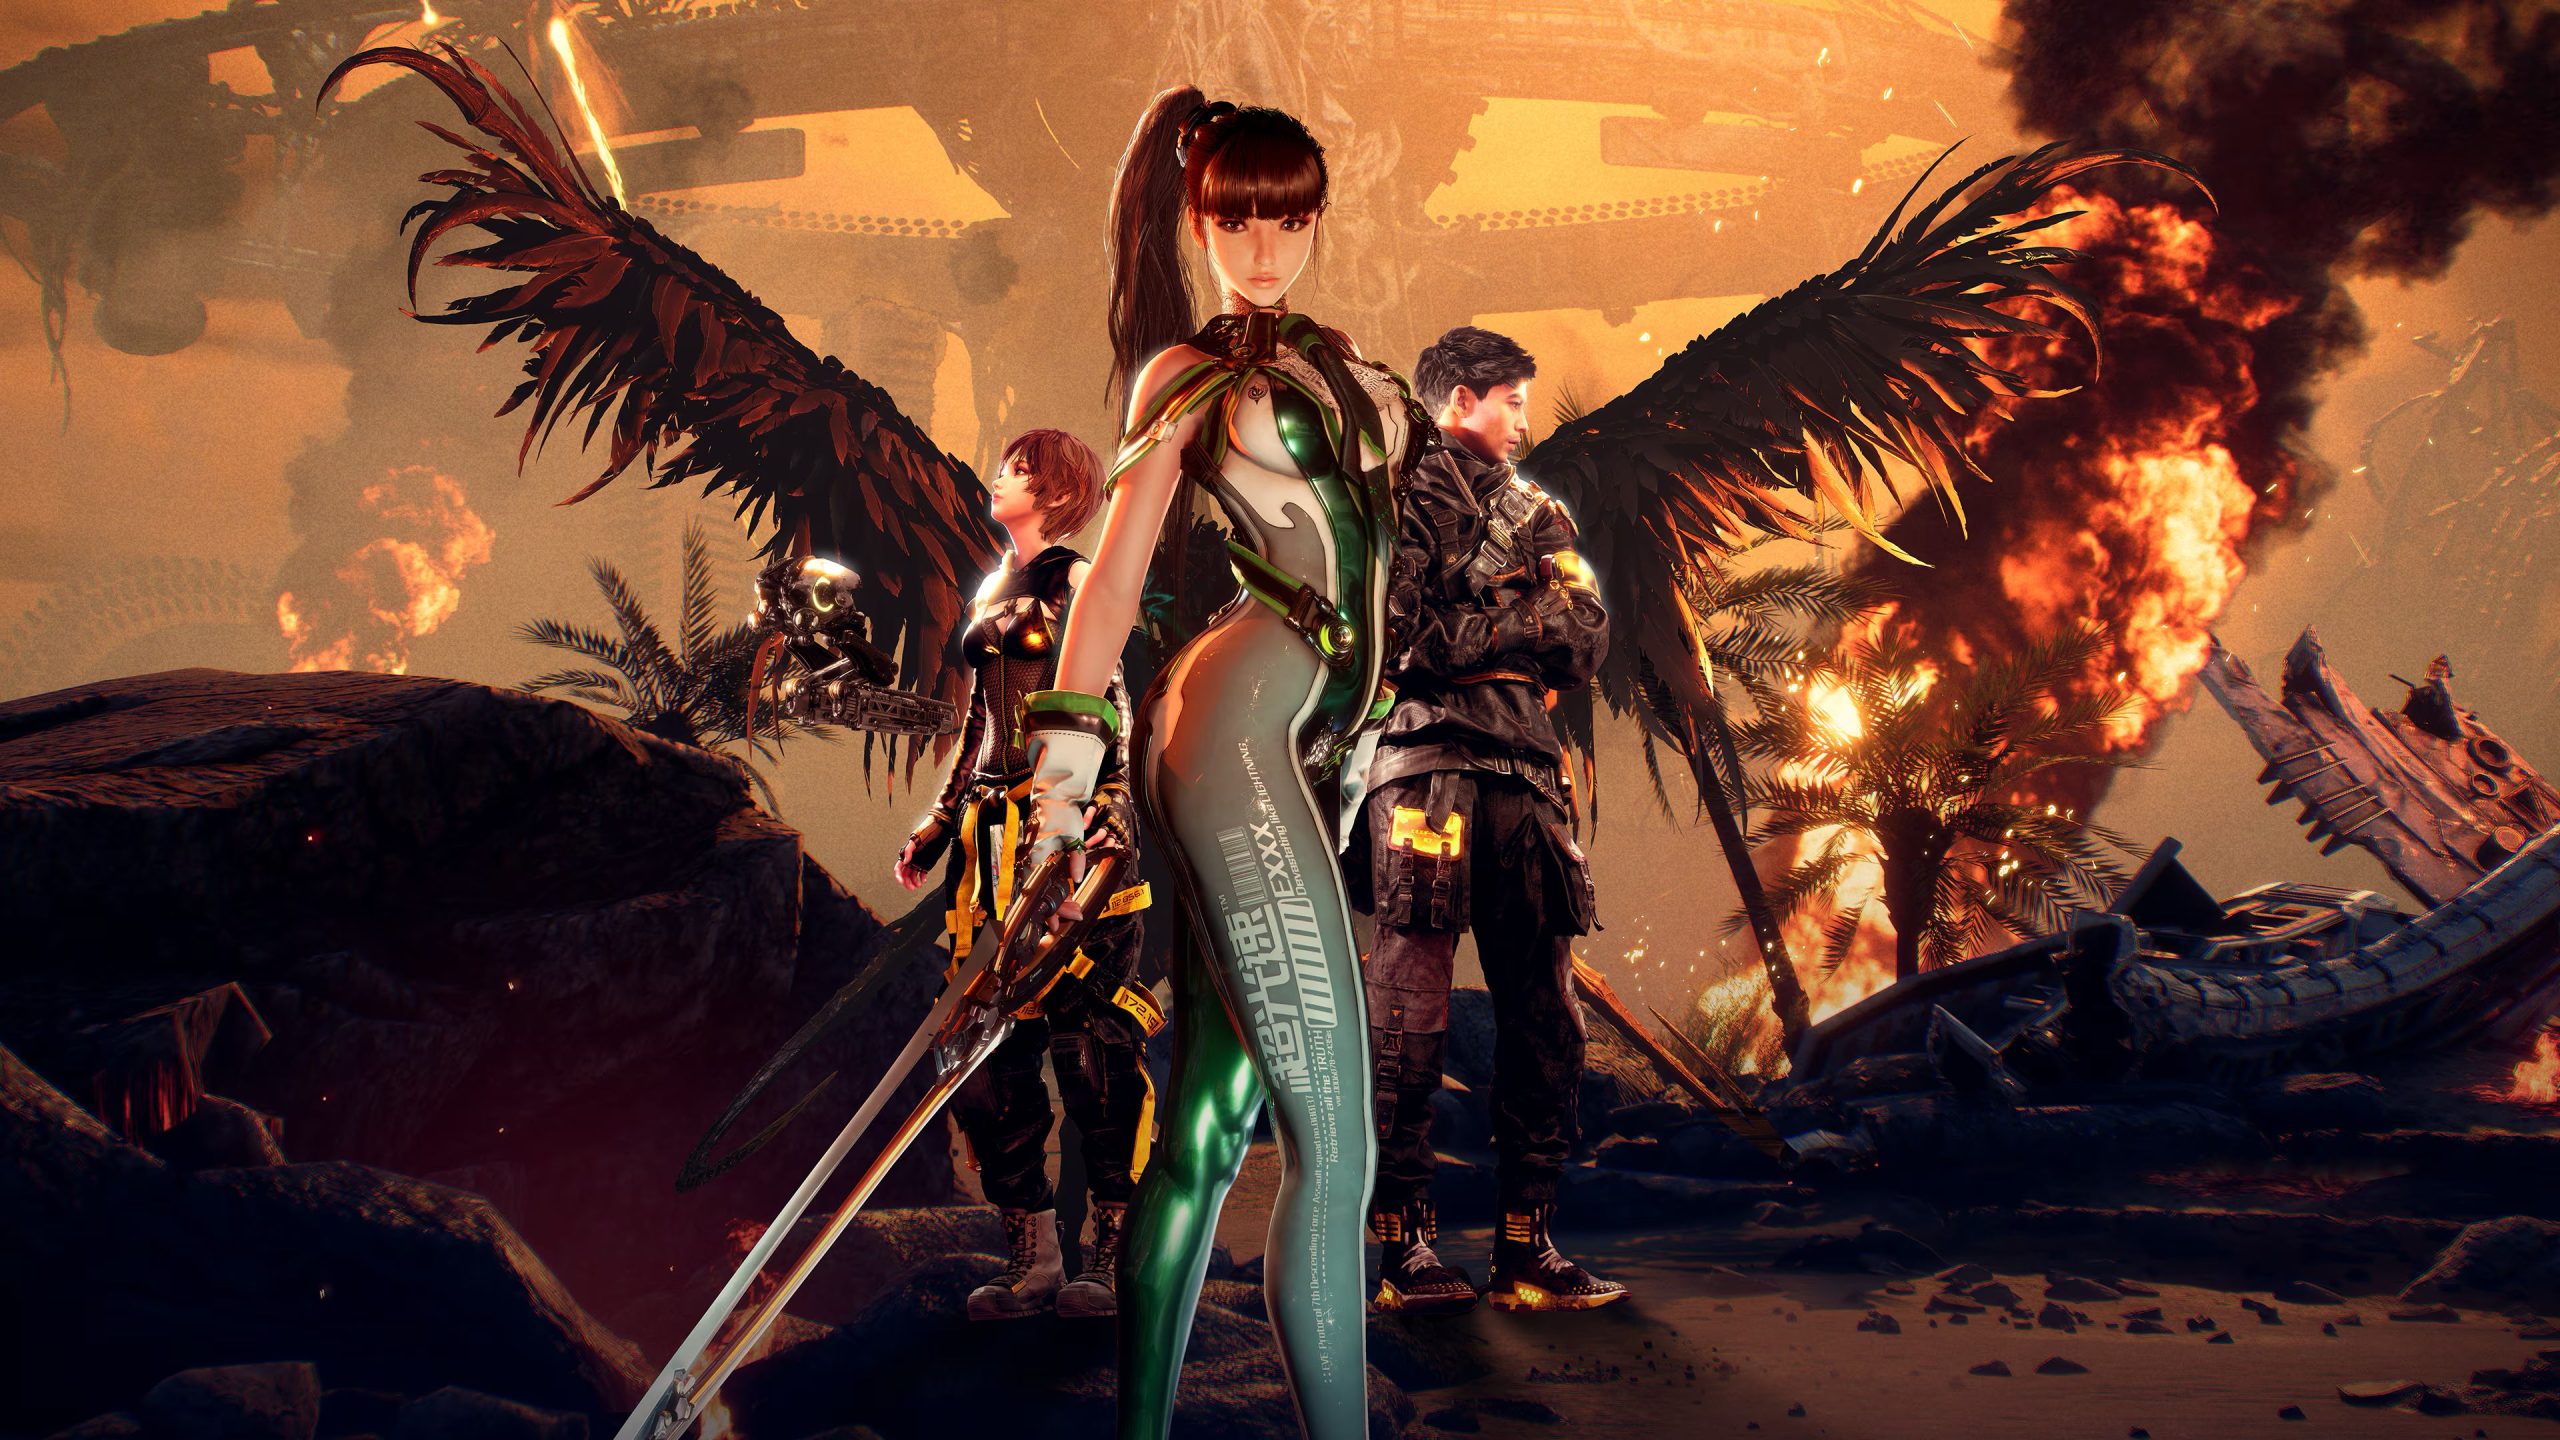 Promotional image from Stellar Blade showing heroine Eve in the middle, striking a fighting pose with her hips extended